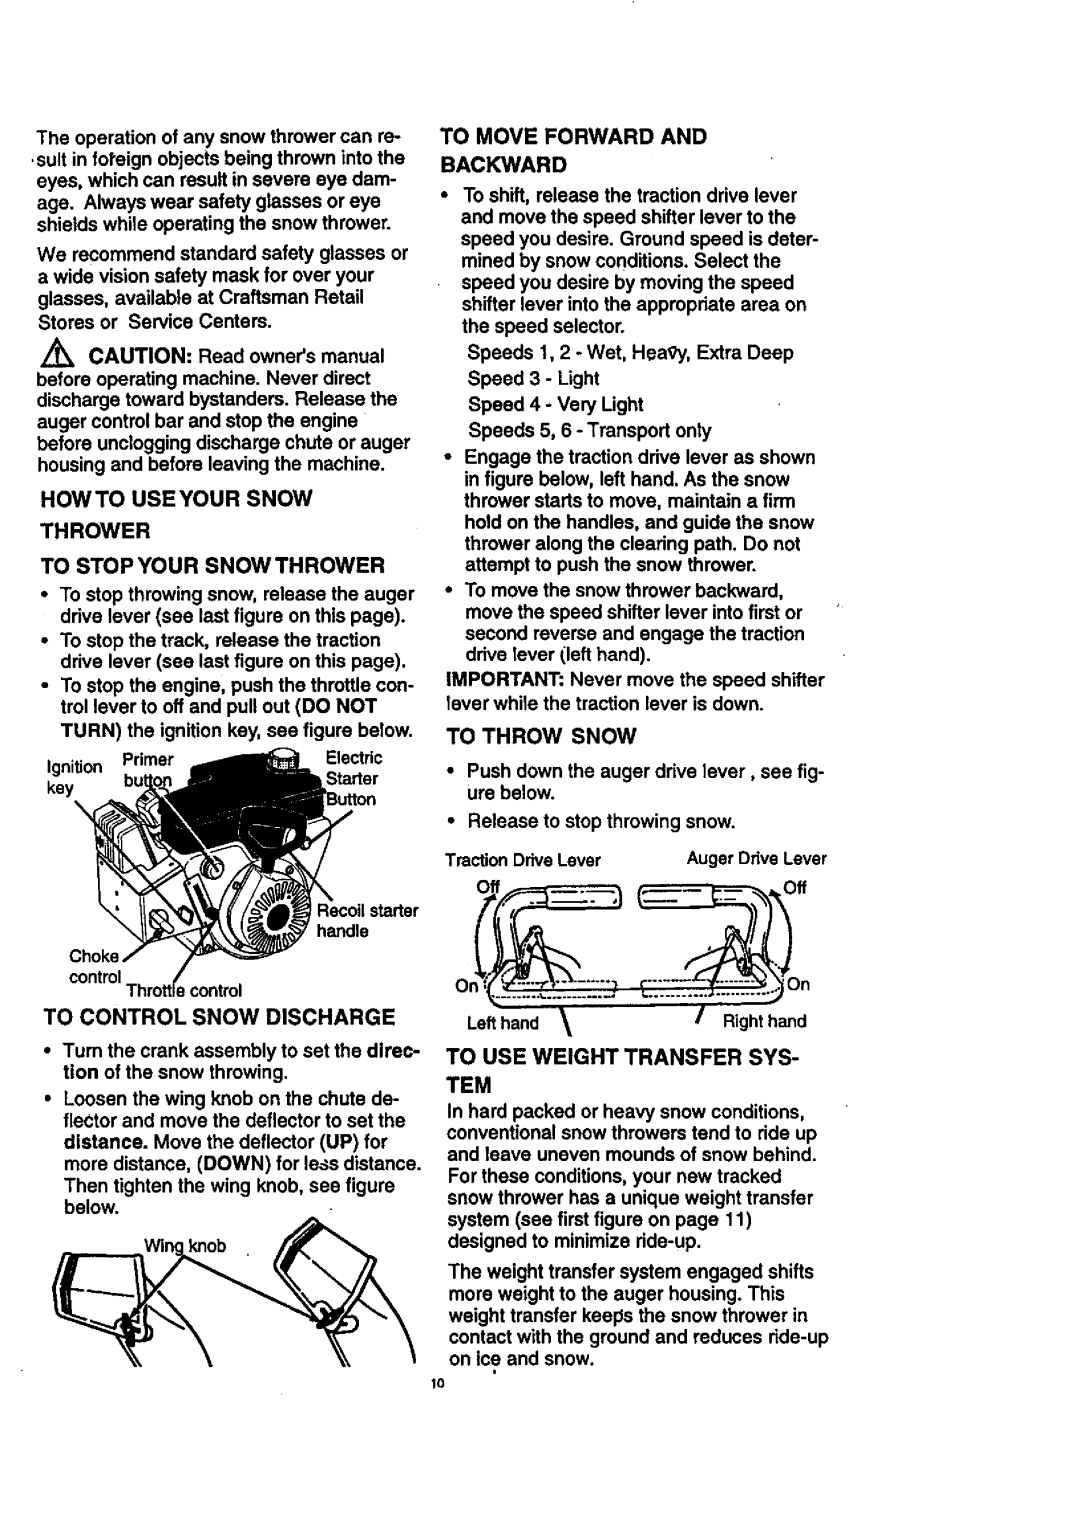 Craftsman 536.8884 manual To Control Snow Discharge, To Throw Snow, To Use Weight Transfer Sys, Howto Useyour Snow Thrower 